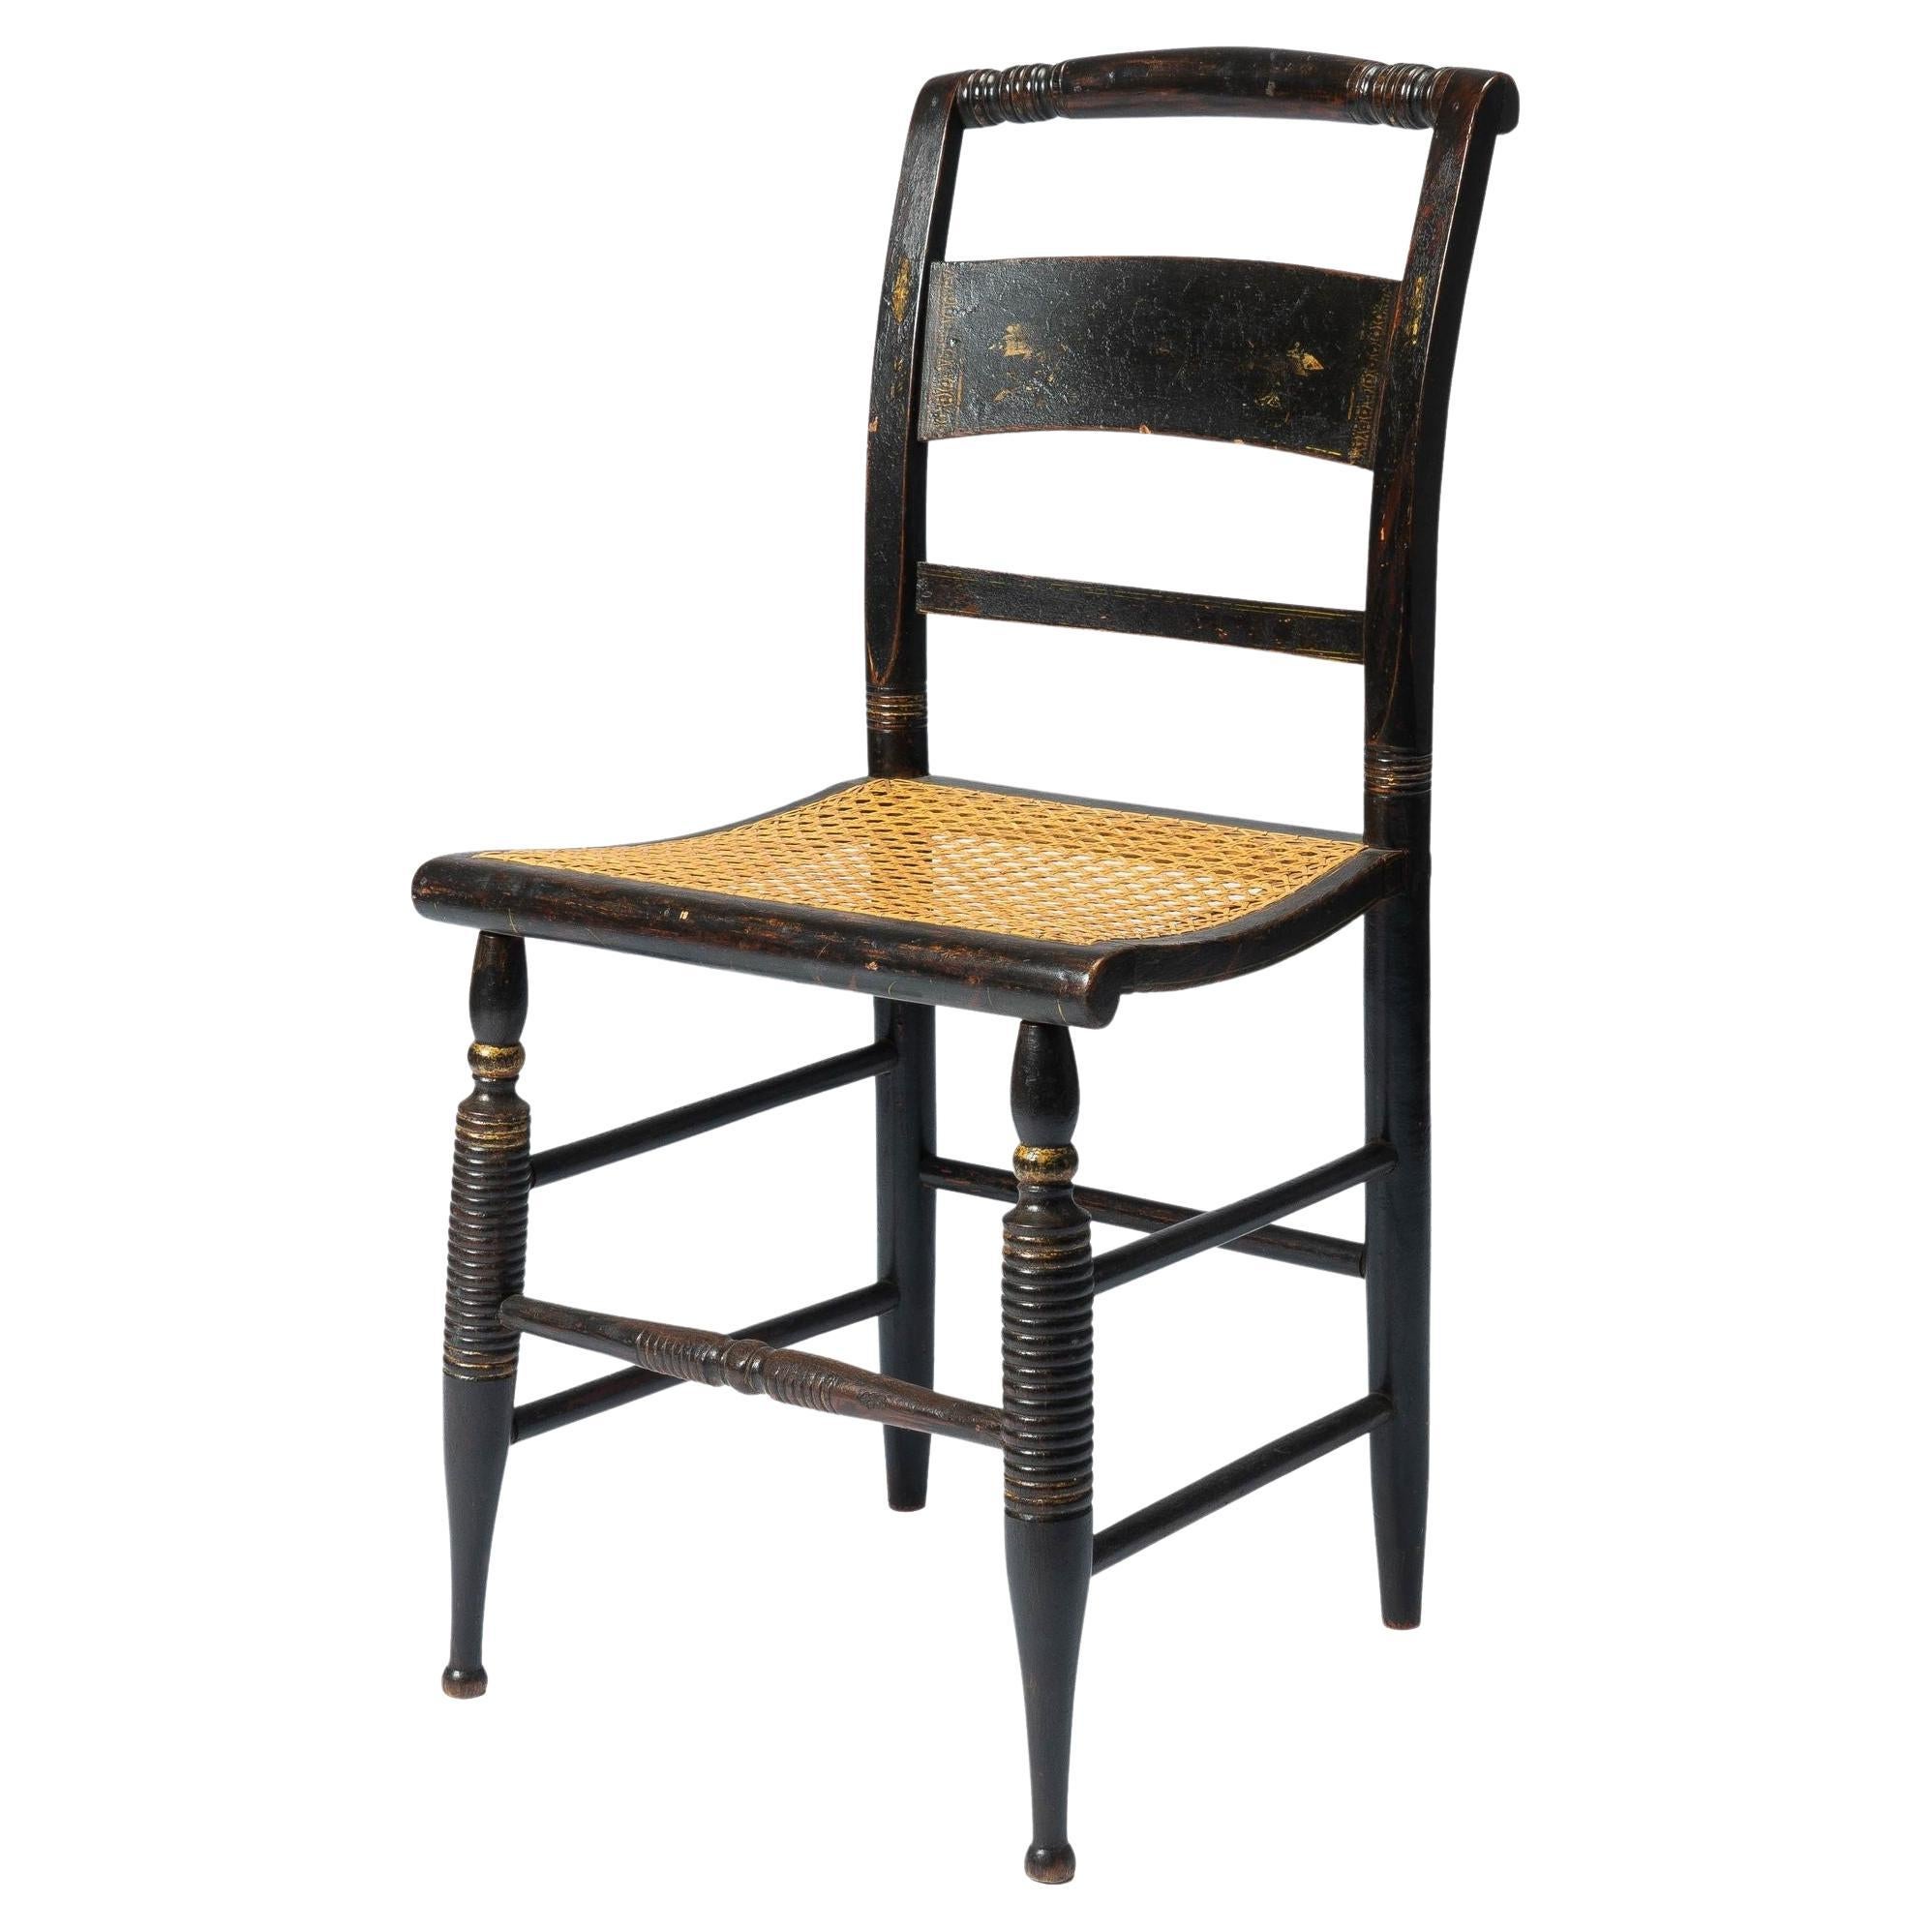 Lambert Hitchcock Caned Seat Side Chair '1825-1832'